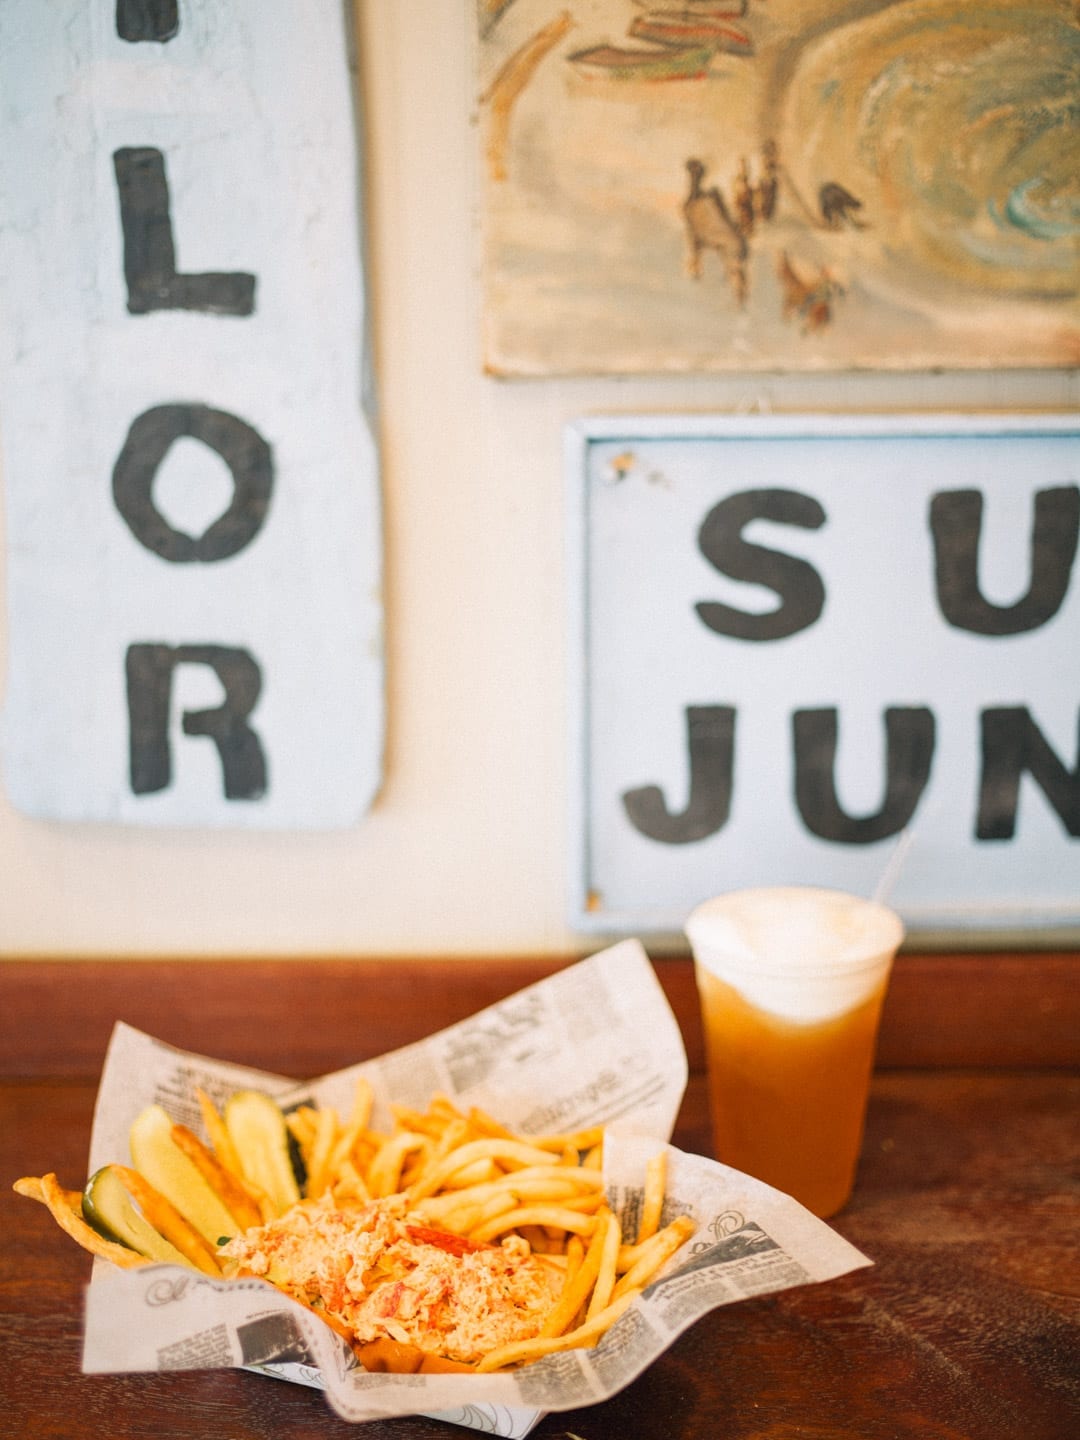 Martha's Vineyard Guide - Lobster roll, fries, and a beer